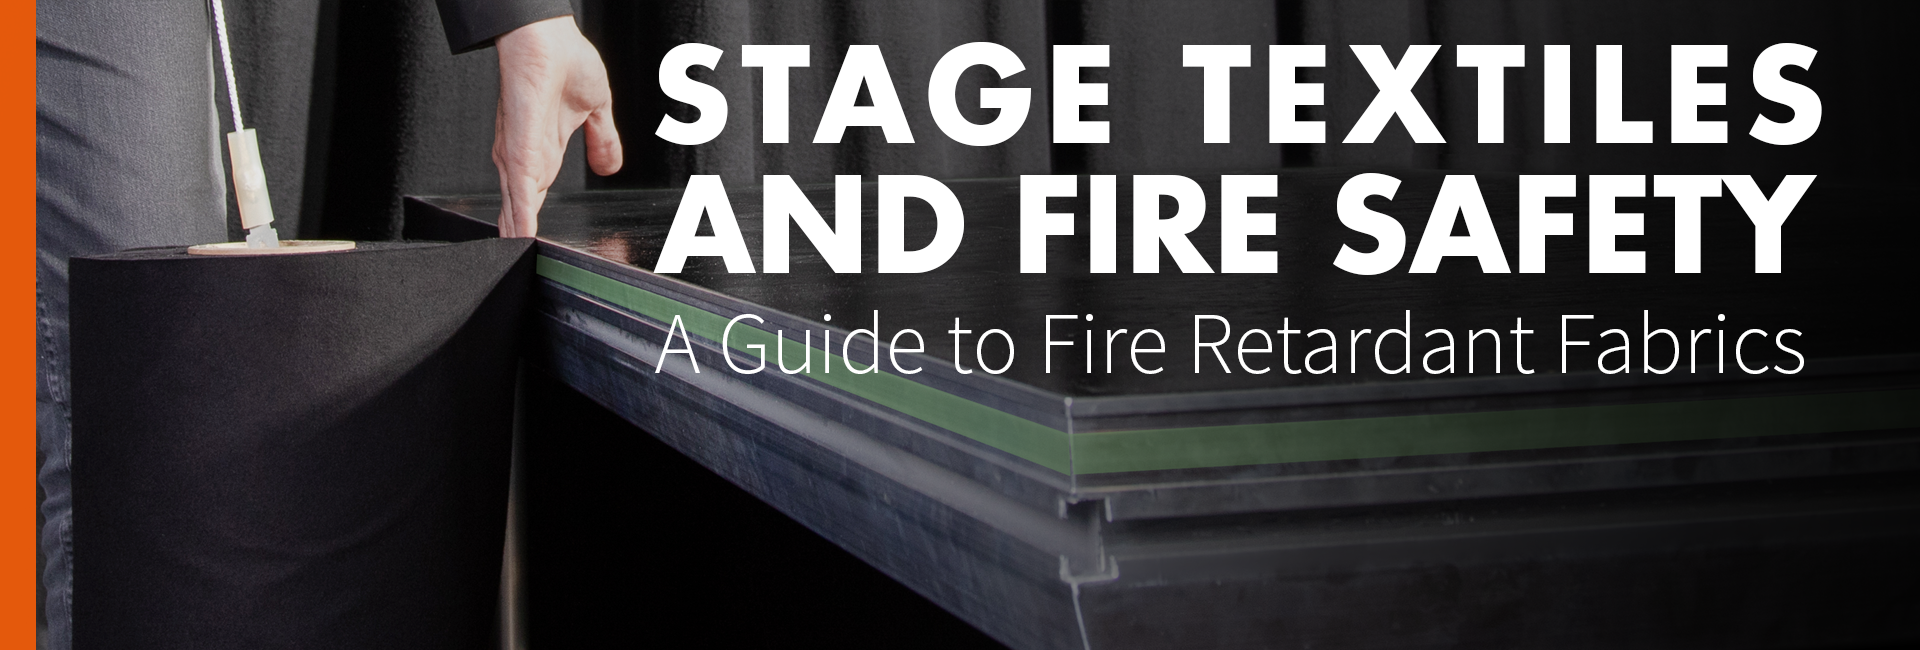 Stage Textiles and Fire Safety: A Guide to Fire Retardant Fabrics